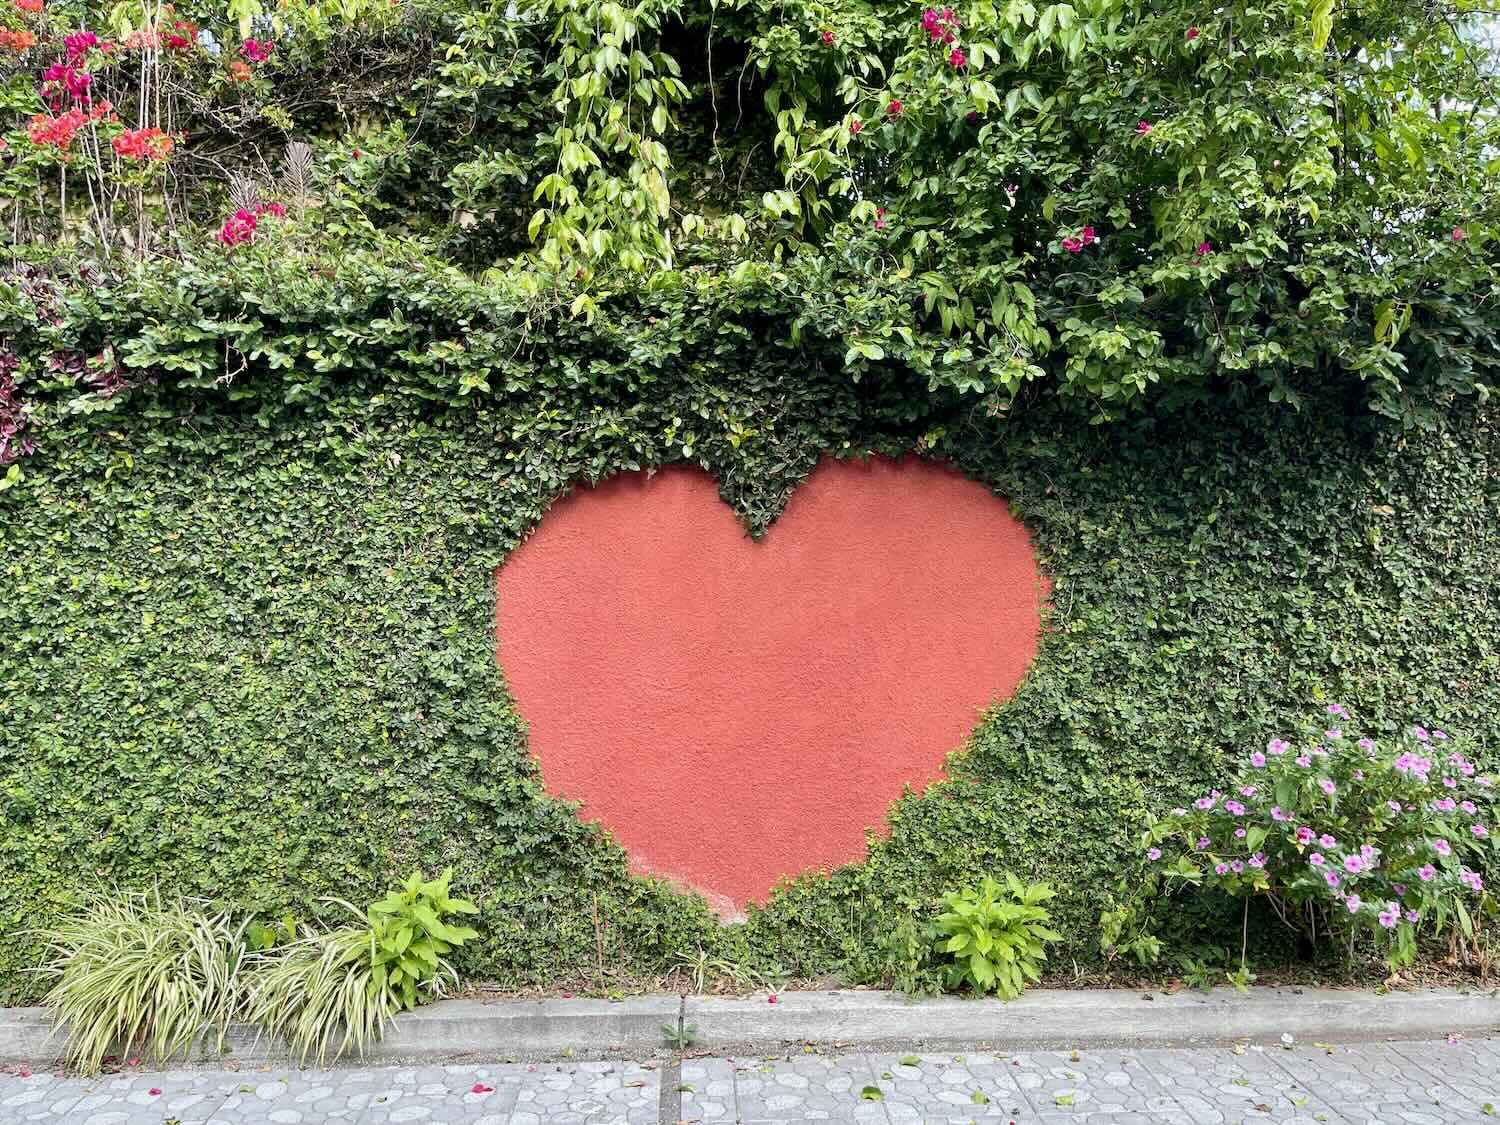 The vines were cut away to reveal the wall behind, in the shape of a heart